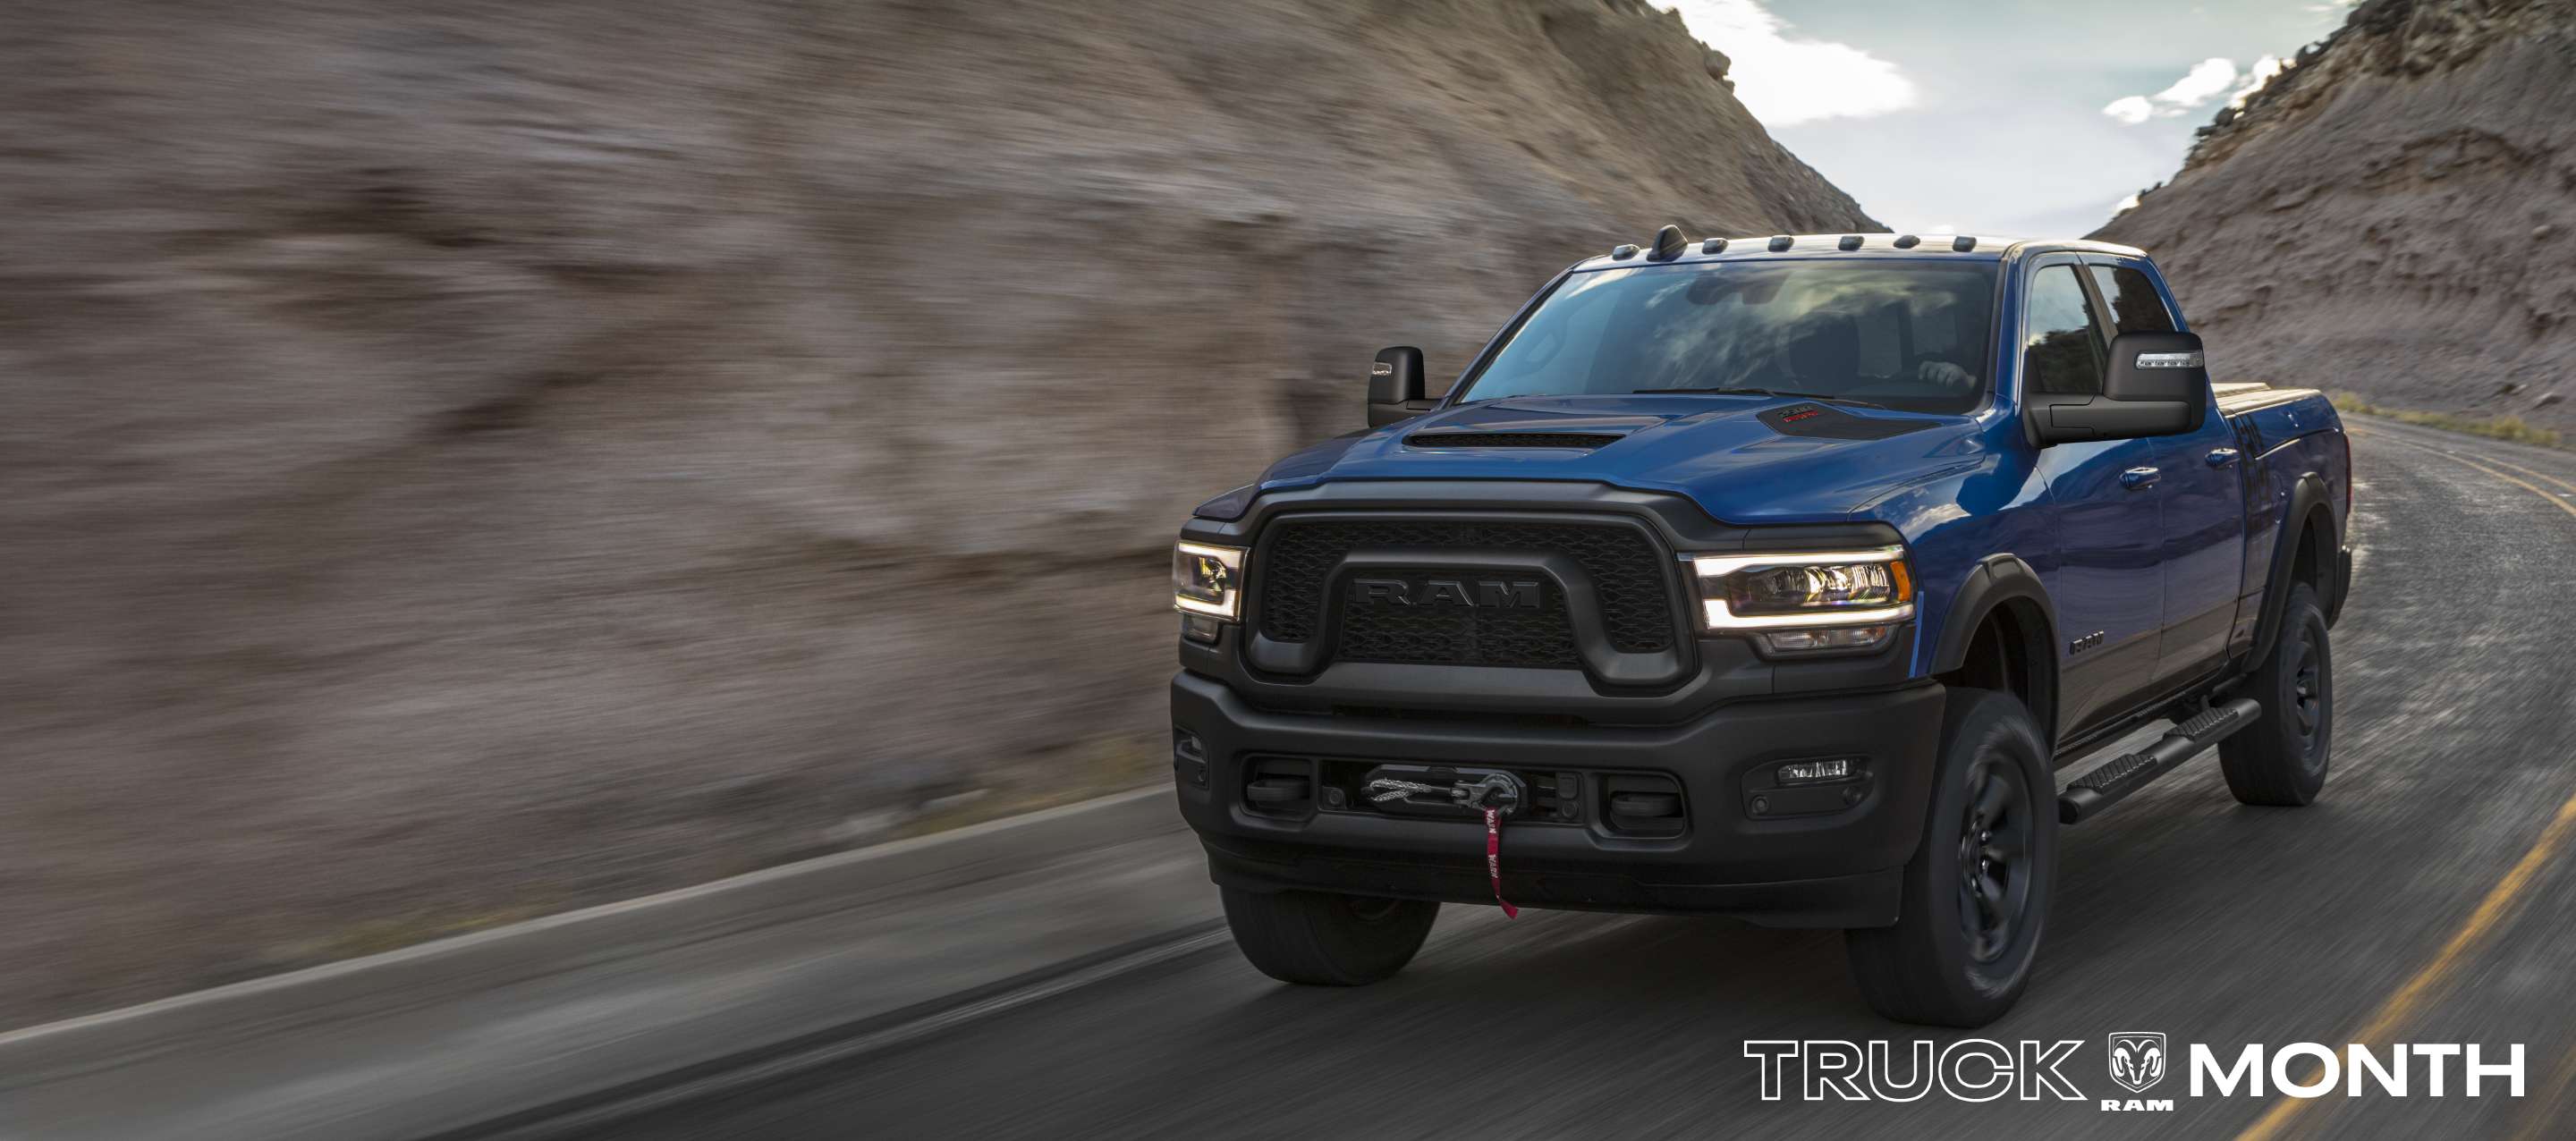 A blue 2024 Ram 2500 Power Wagon 4x4 Crew Cab being driven on a highway in the mountains. The background is blurred to indicate the truck is in motion. Truck Month Sales Event.